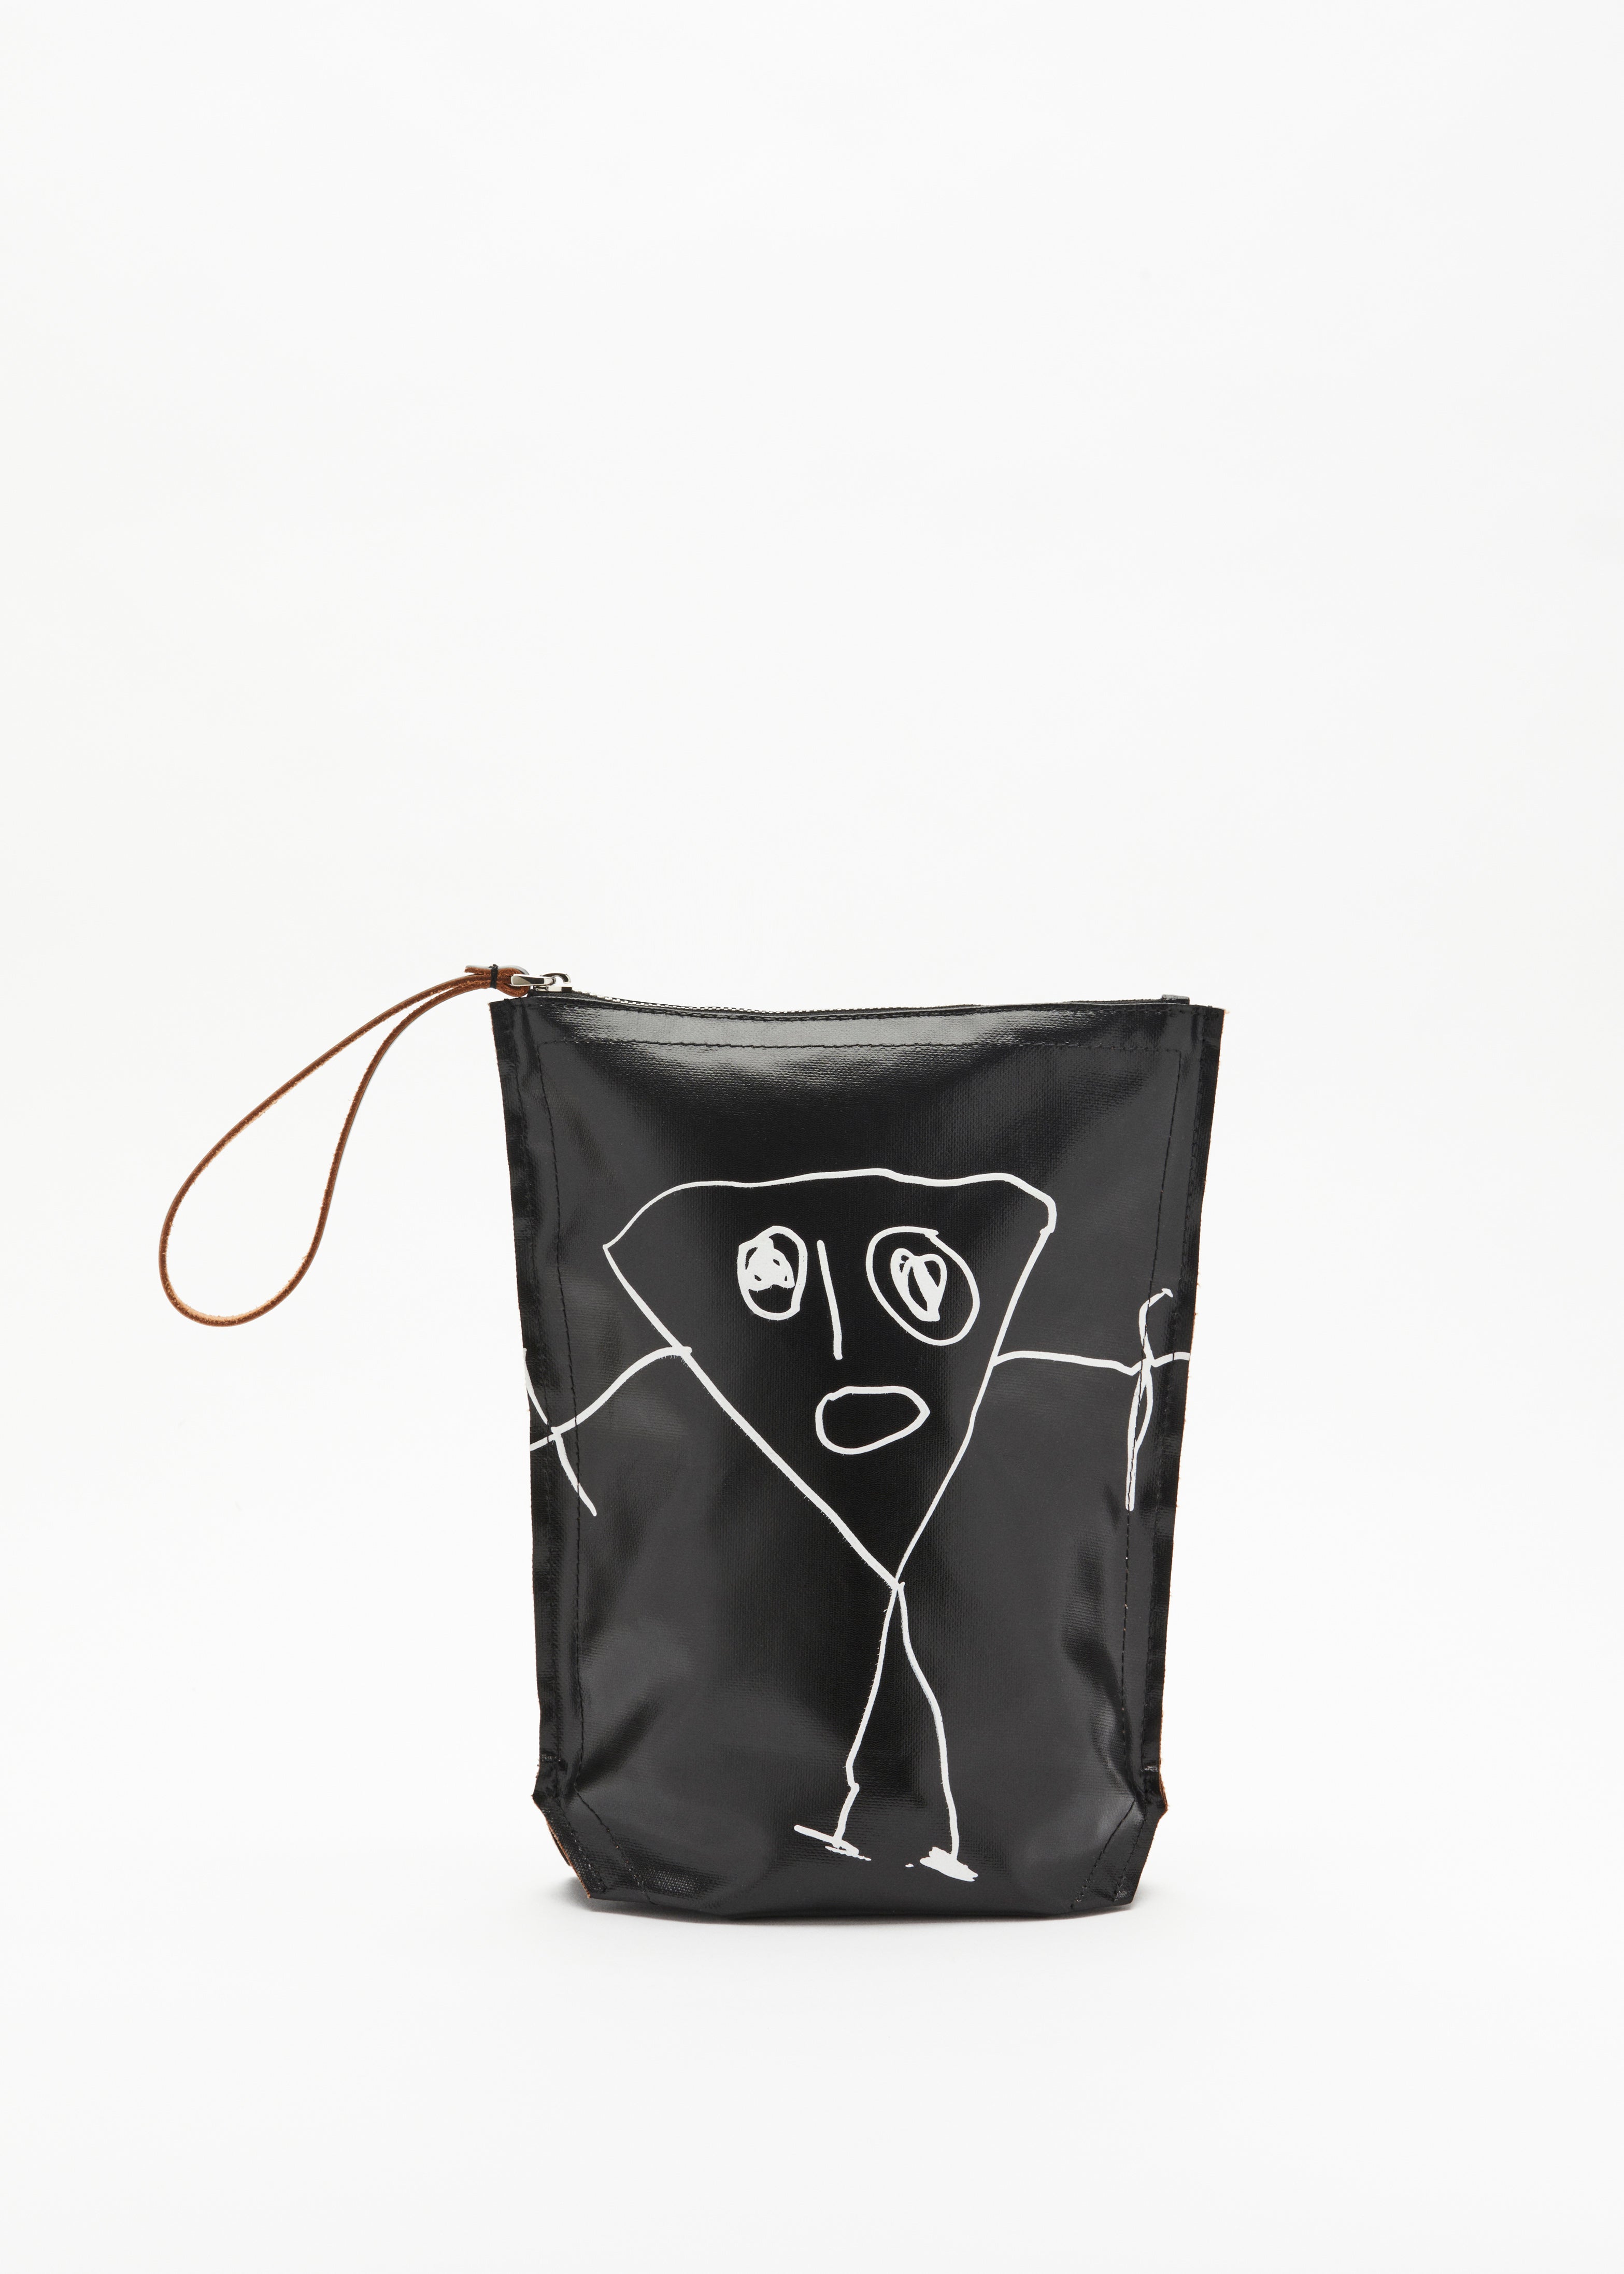 "PILI AND BIANCA" BLACK POUCH